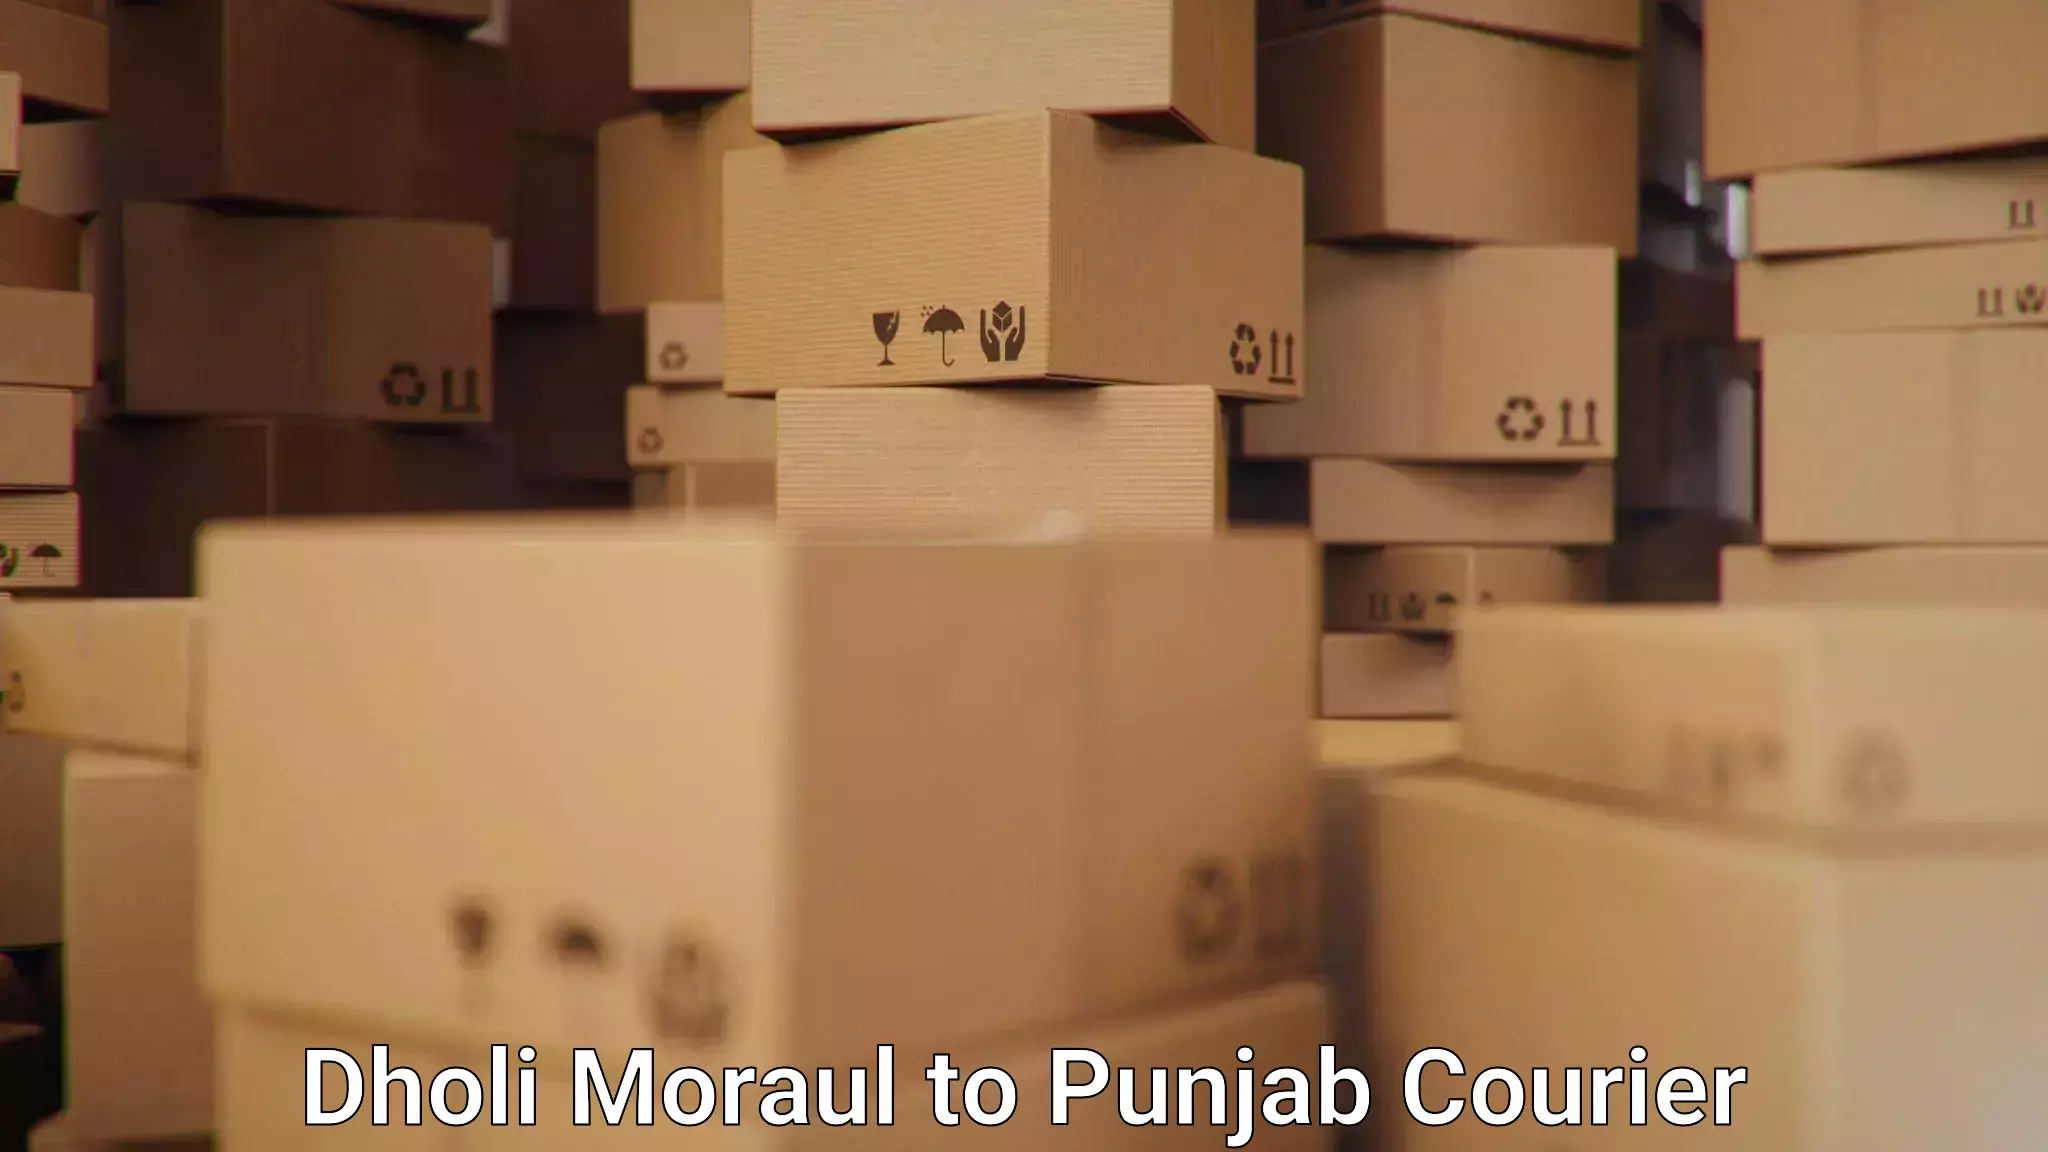 Multi-service courier options Dholi Moraul to Firozpur